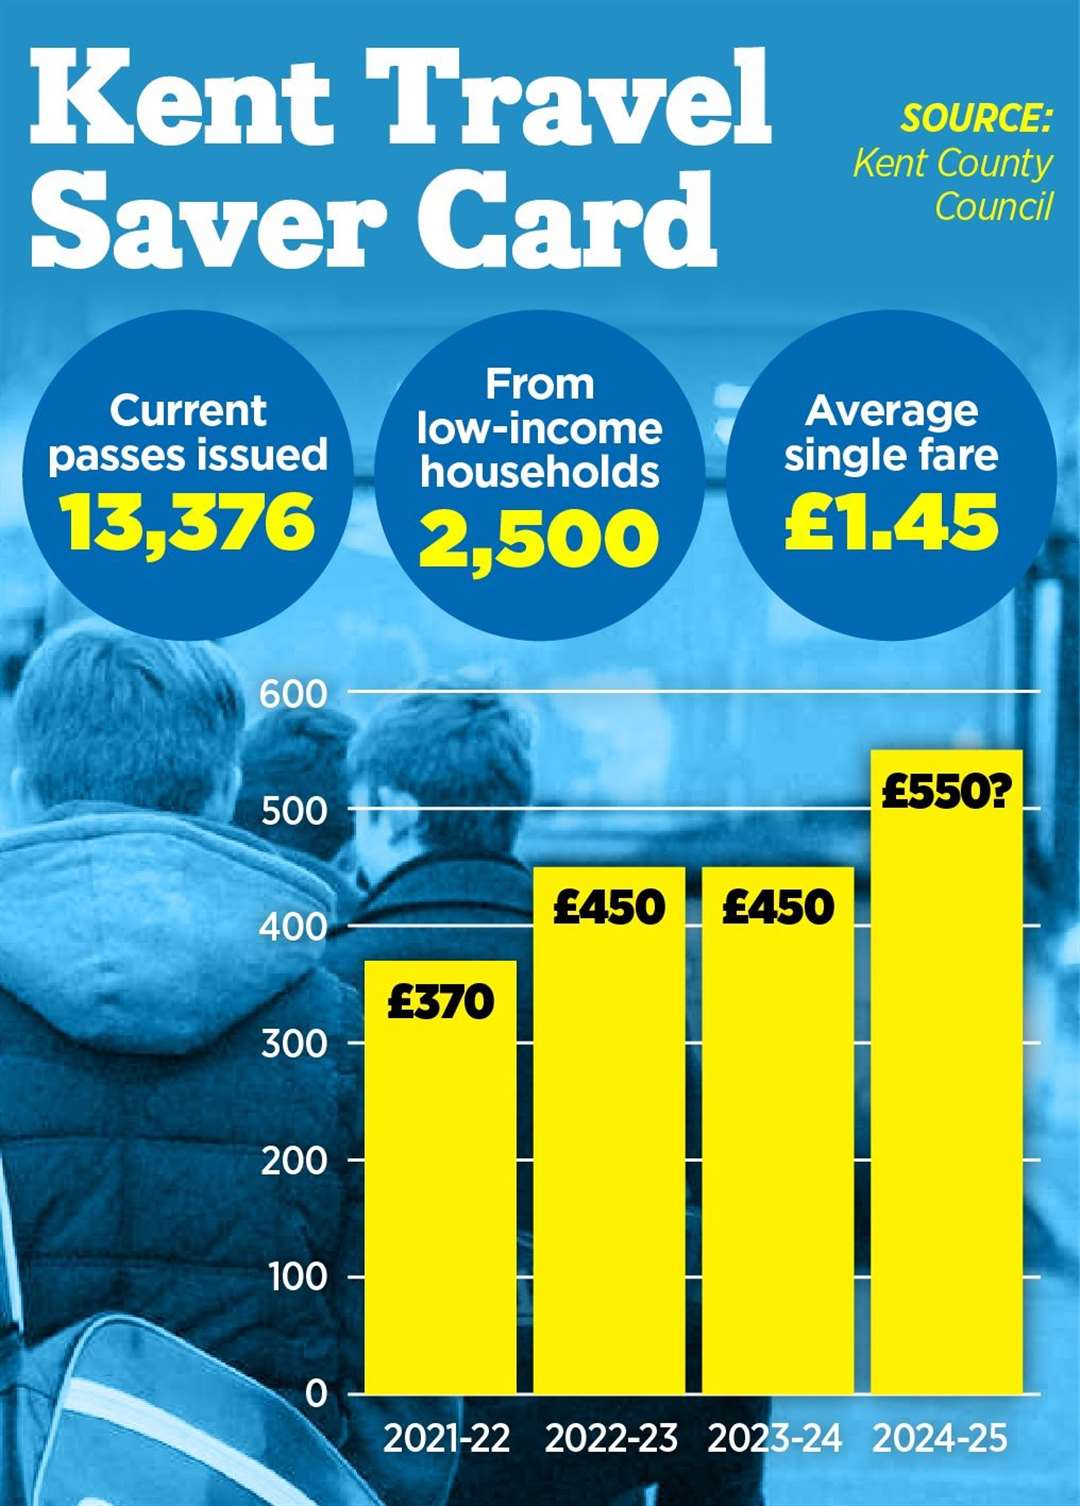 The cost of the Kent Travel Saver Card over time